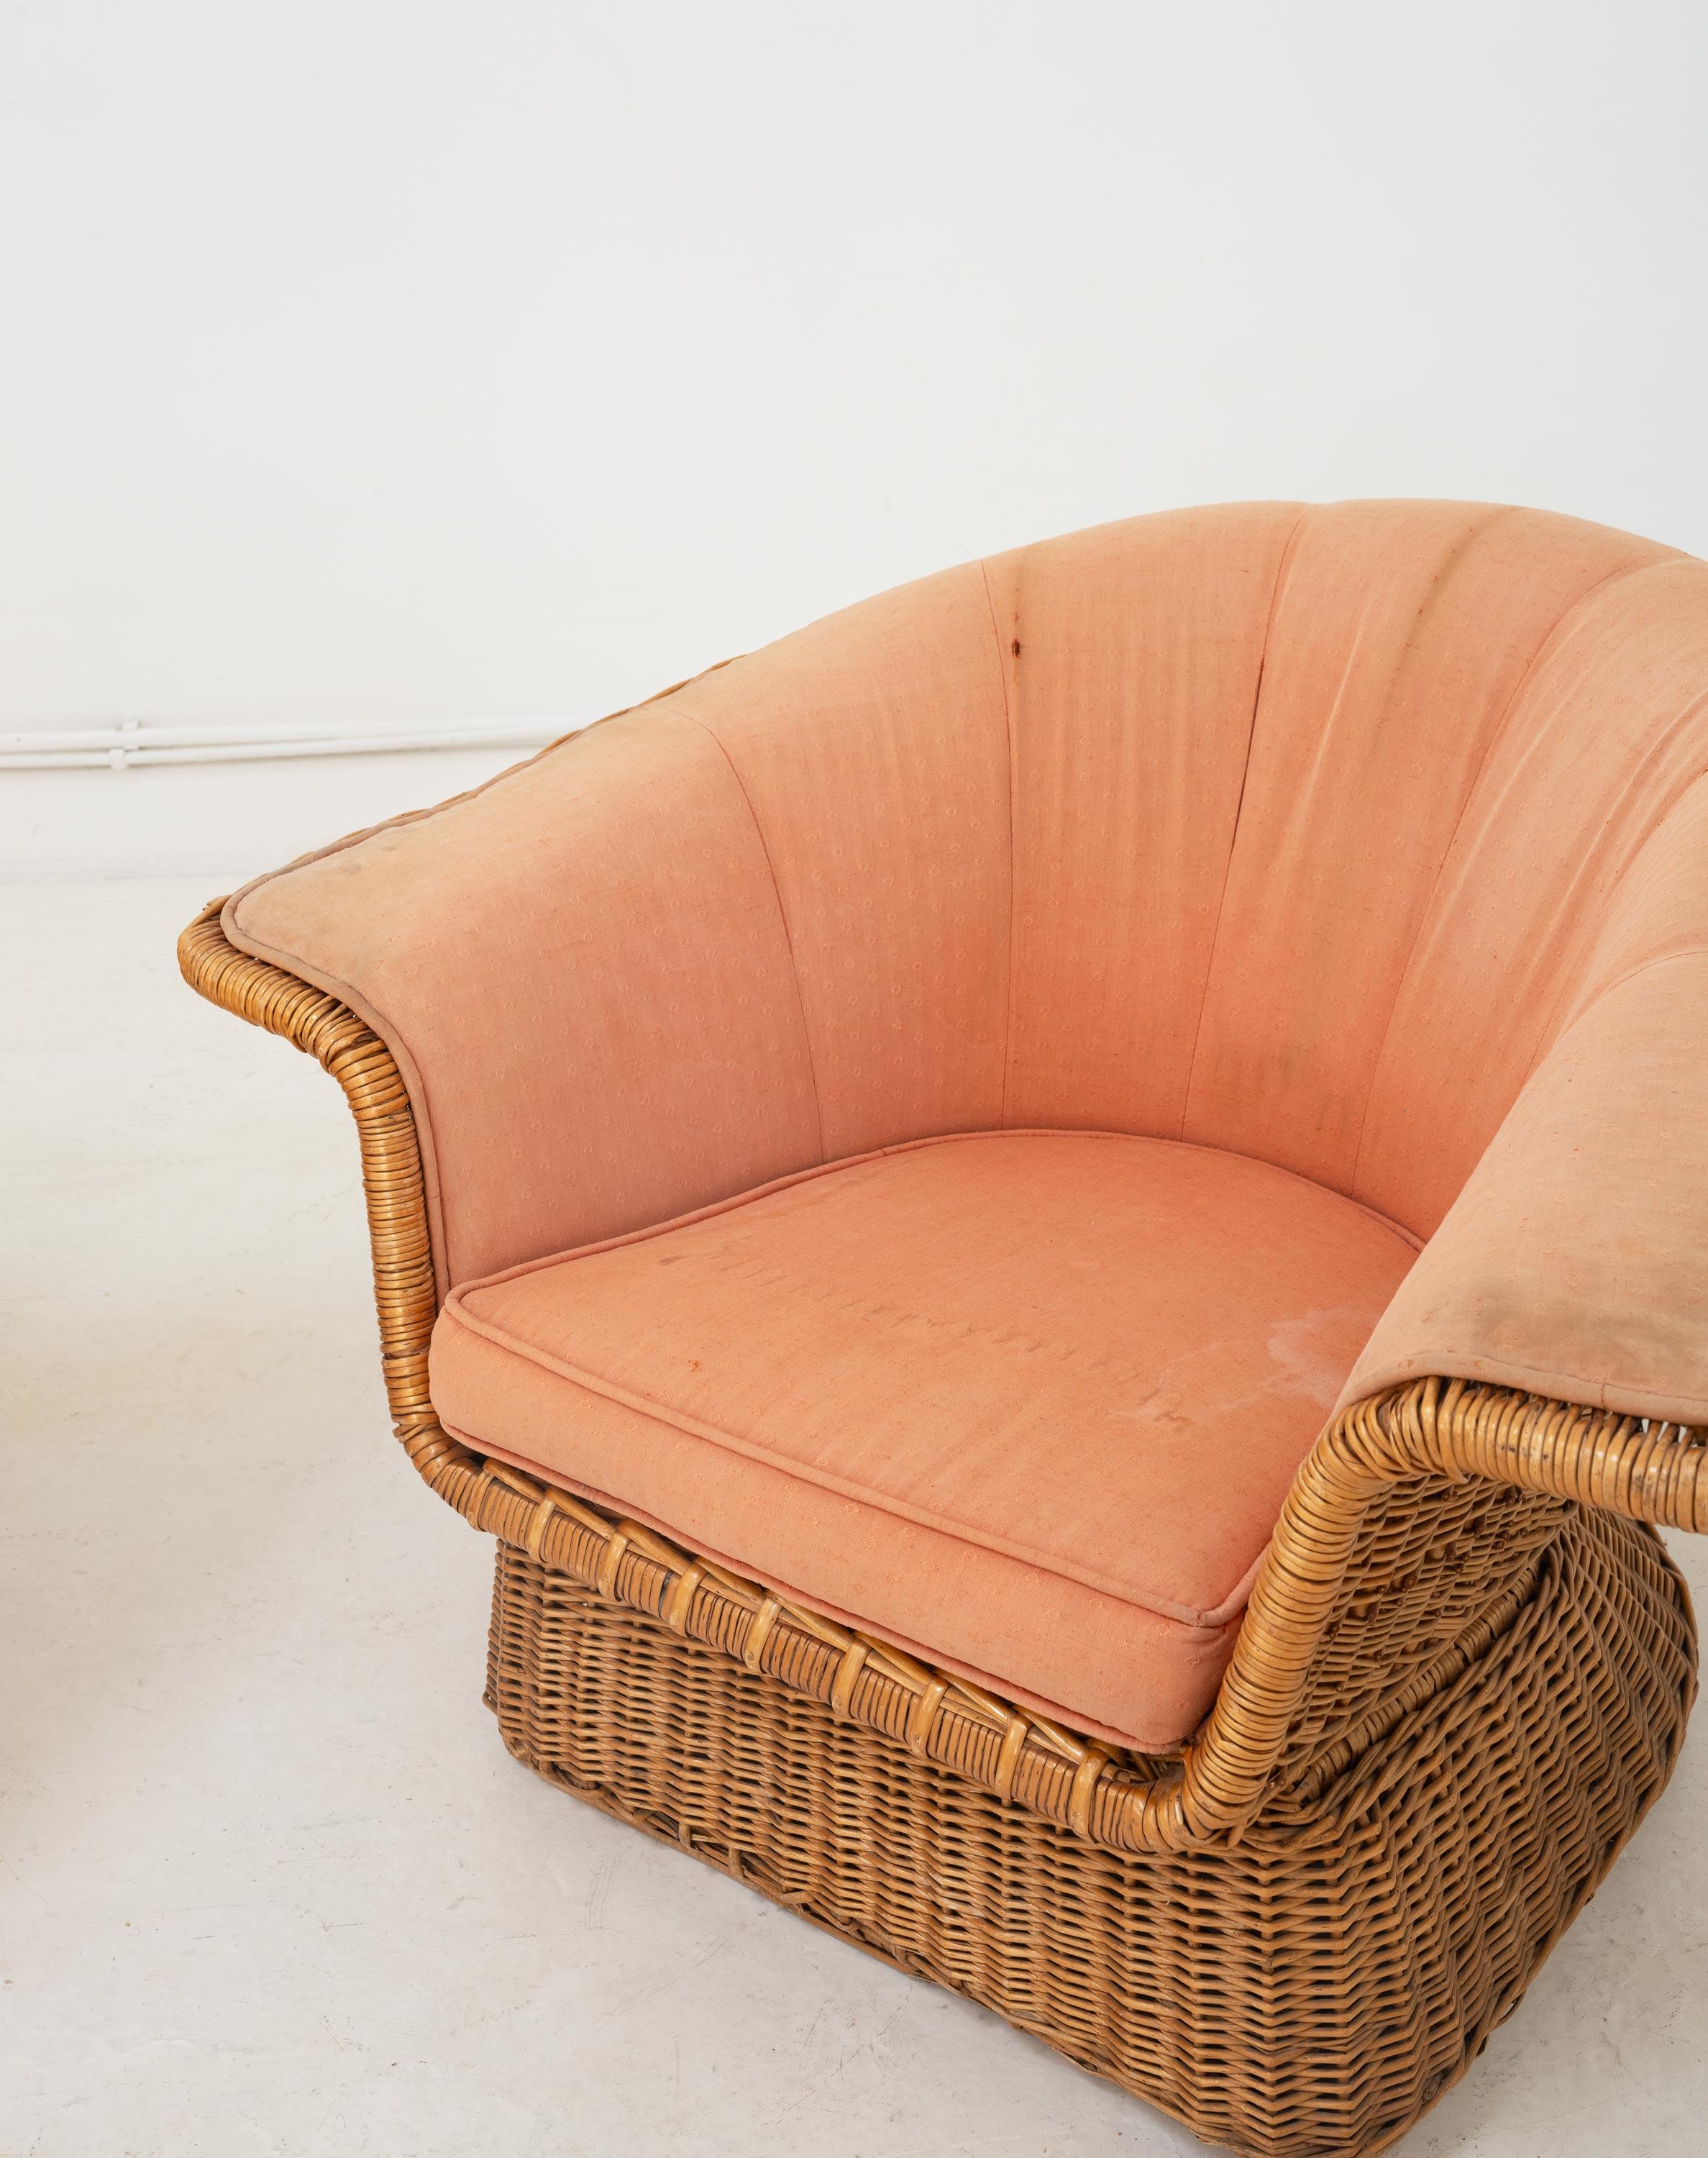 A Pair of Wicker Armchairs by Lyda Levi for McGuire, c.1970 For Sale 1